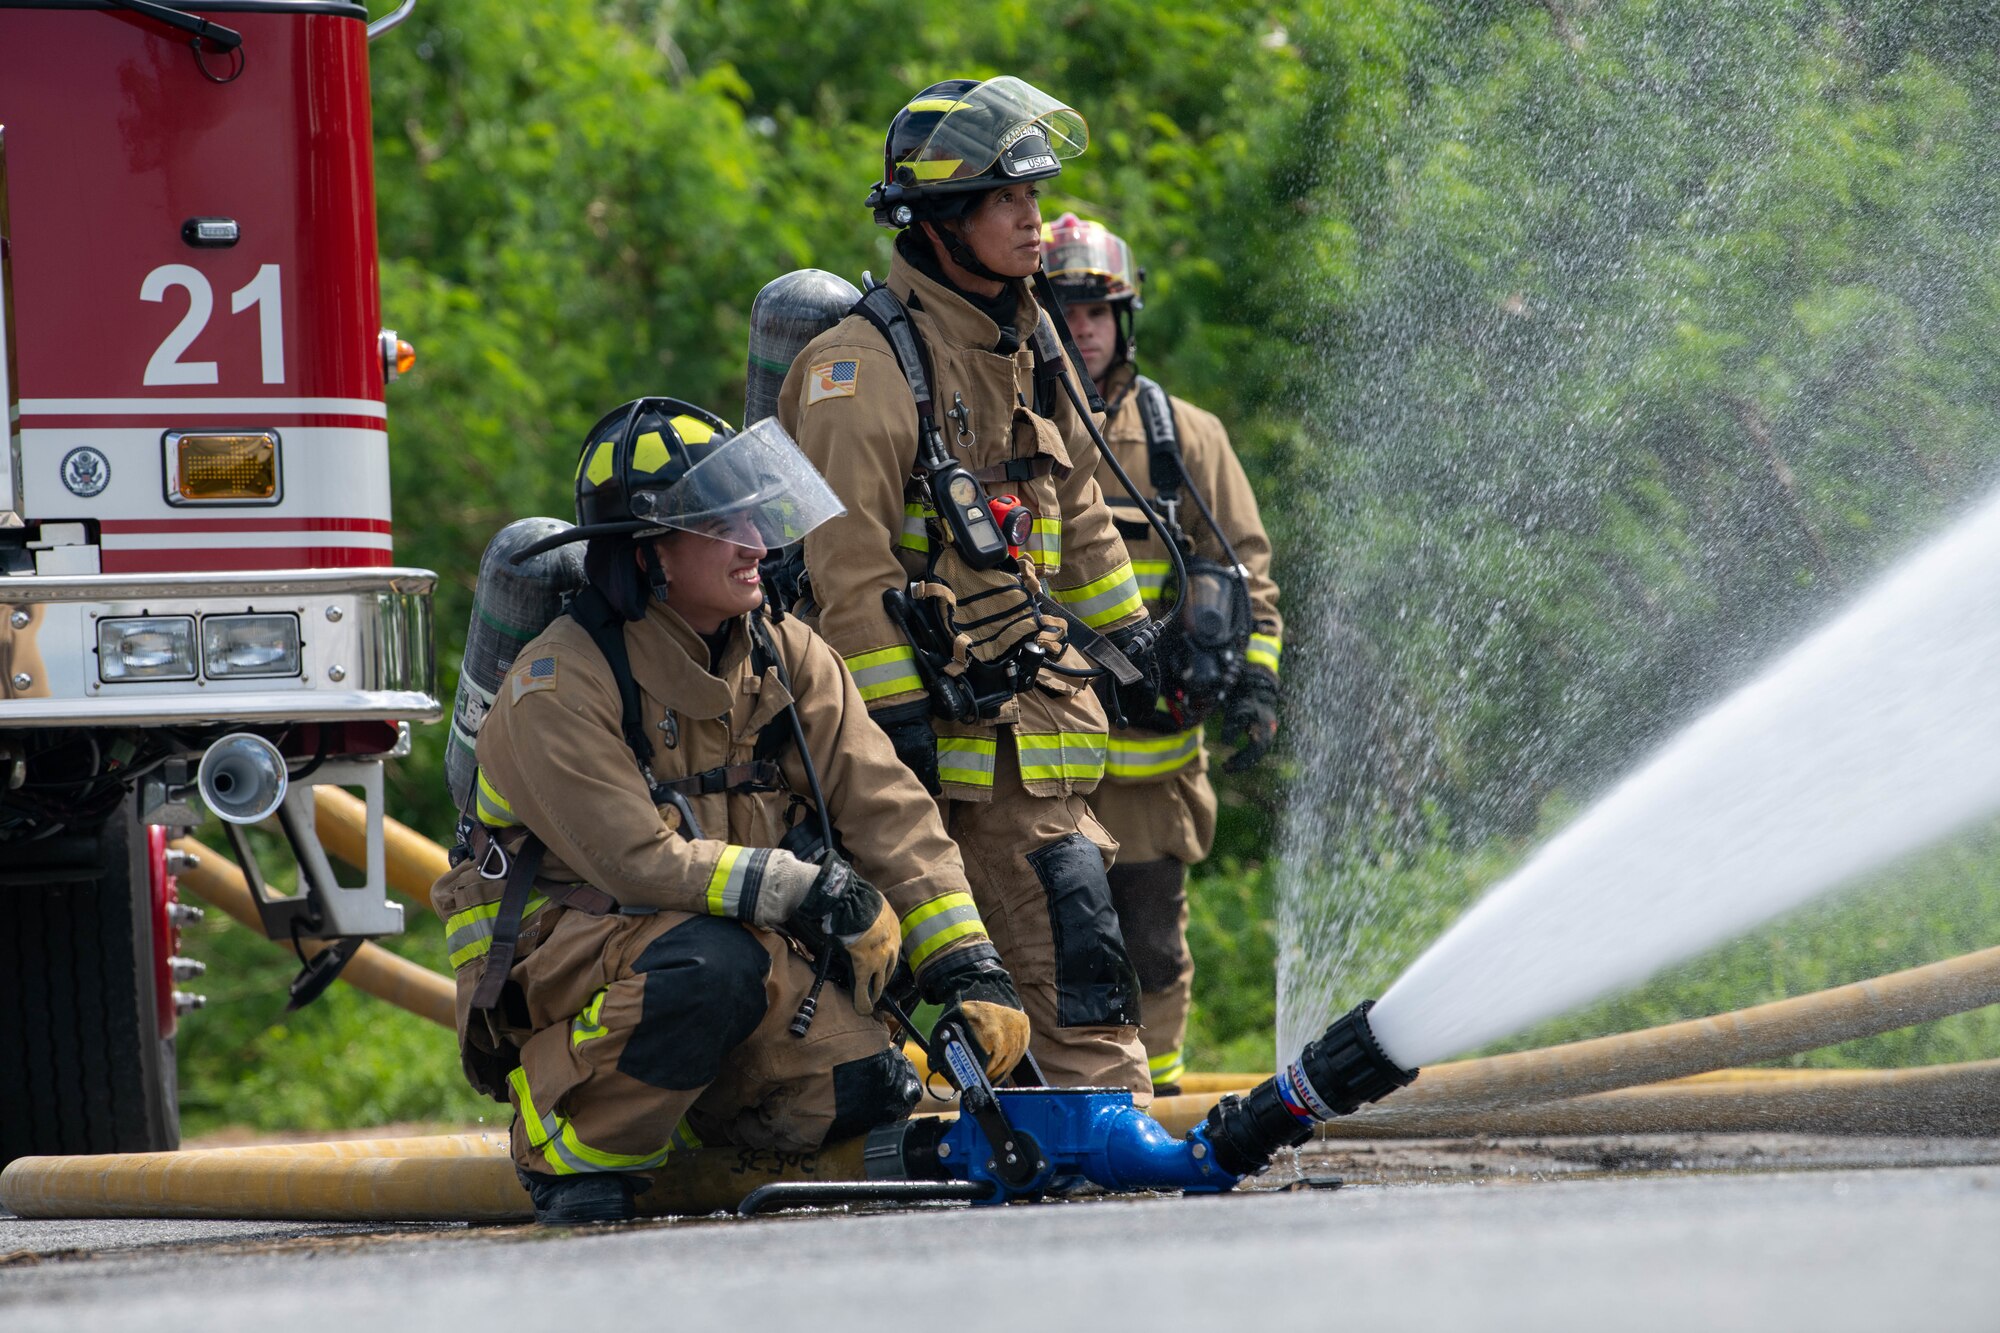 Firemen use Hose to dowse training structure